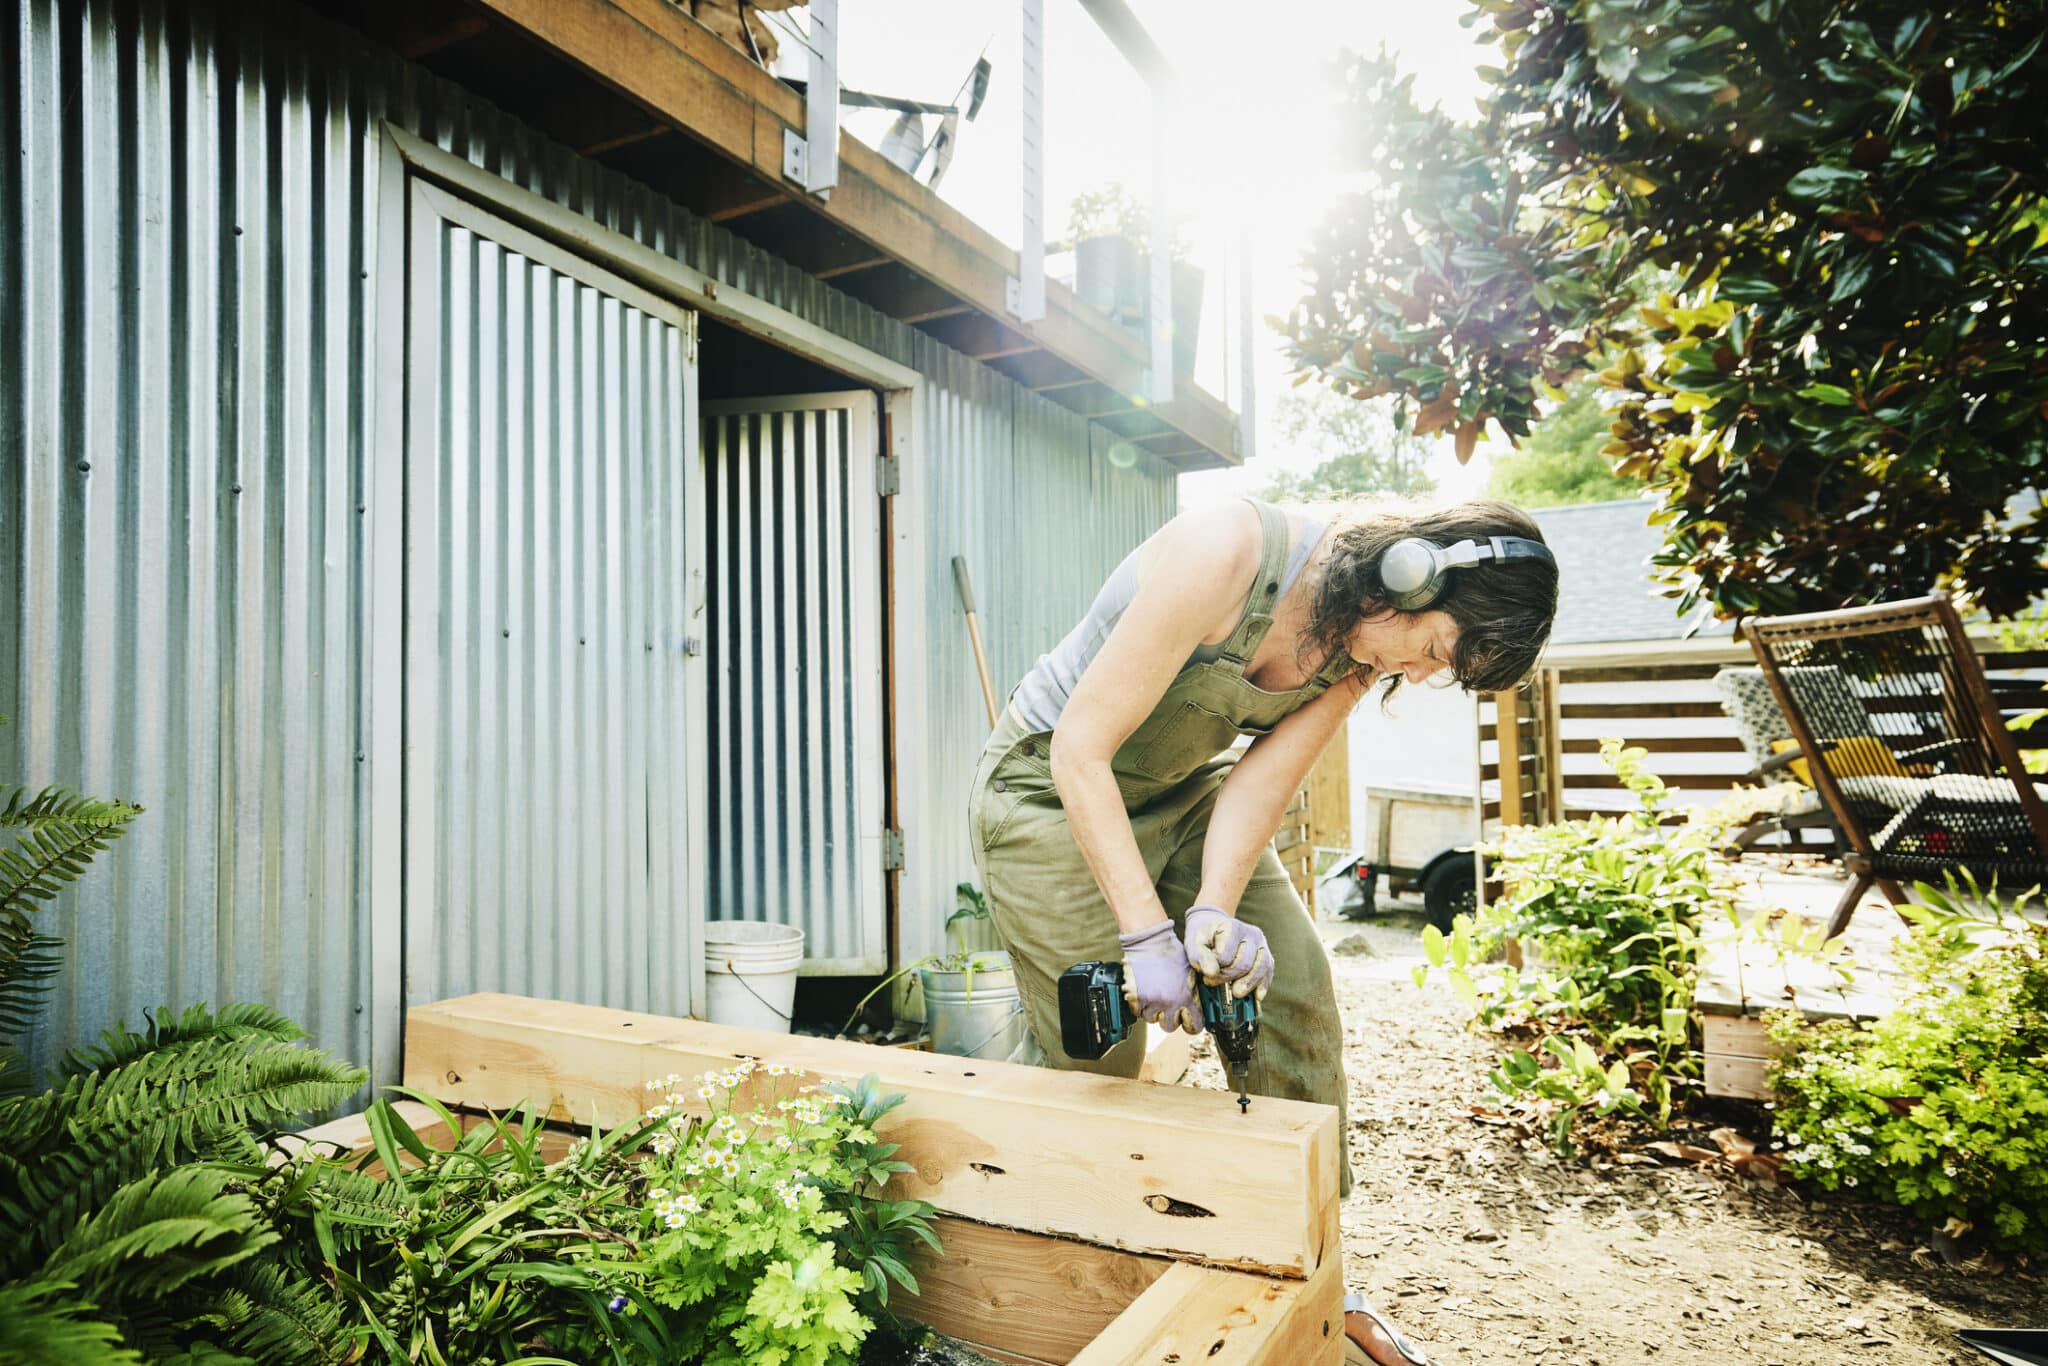 Woman building raised garden beds in backyard on summer afternoon